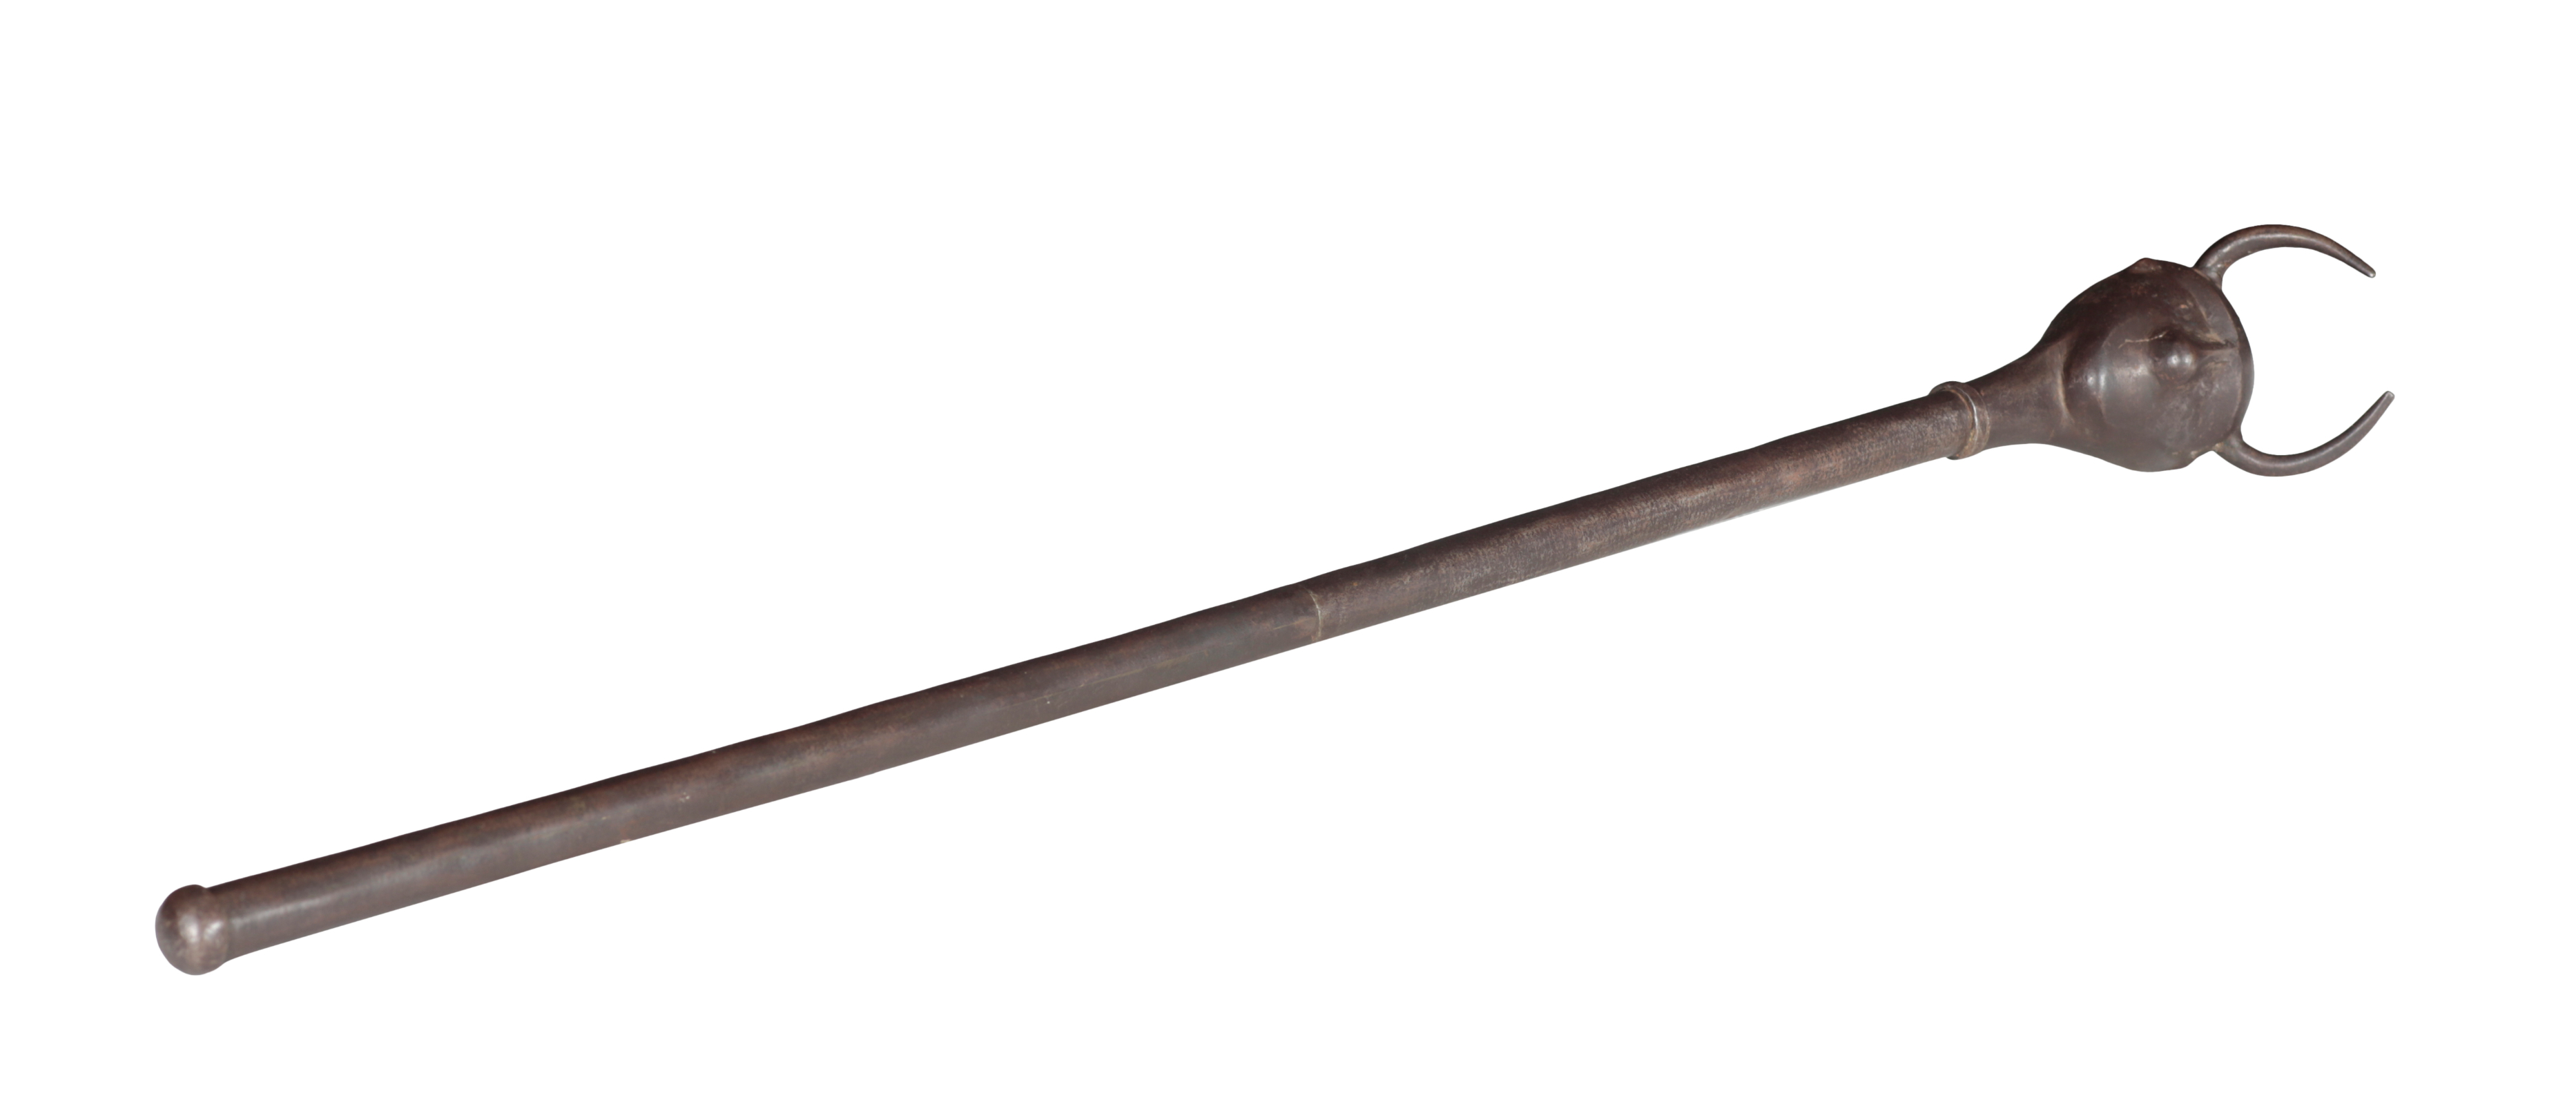 A PERSIAN CEREMONIAL STAFF OR GORZ  310838